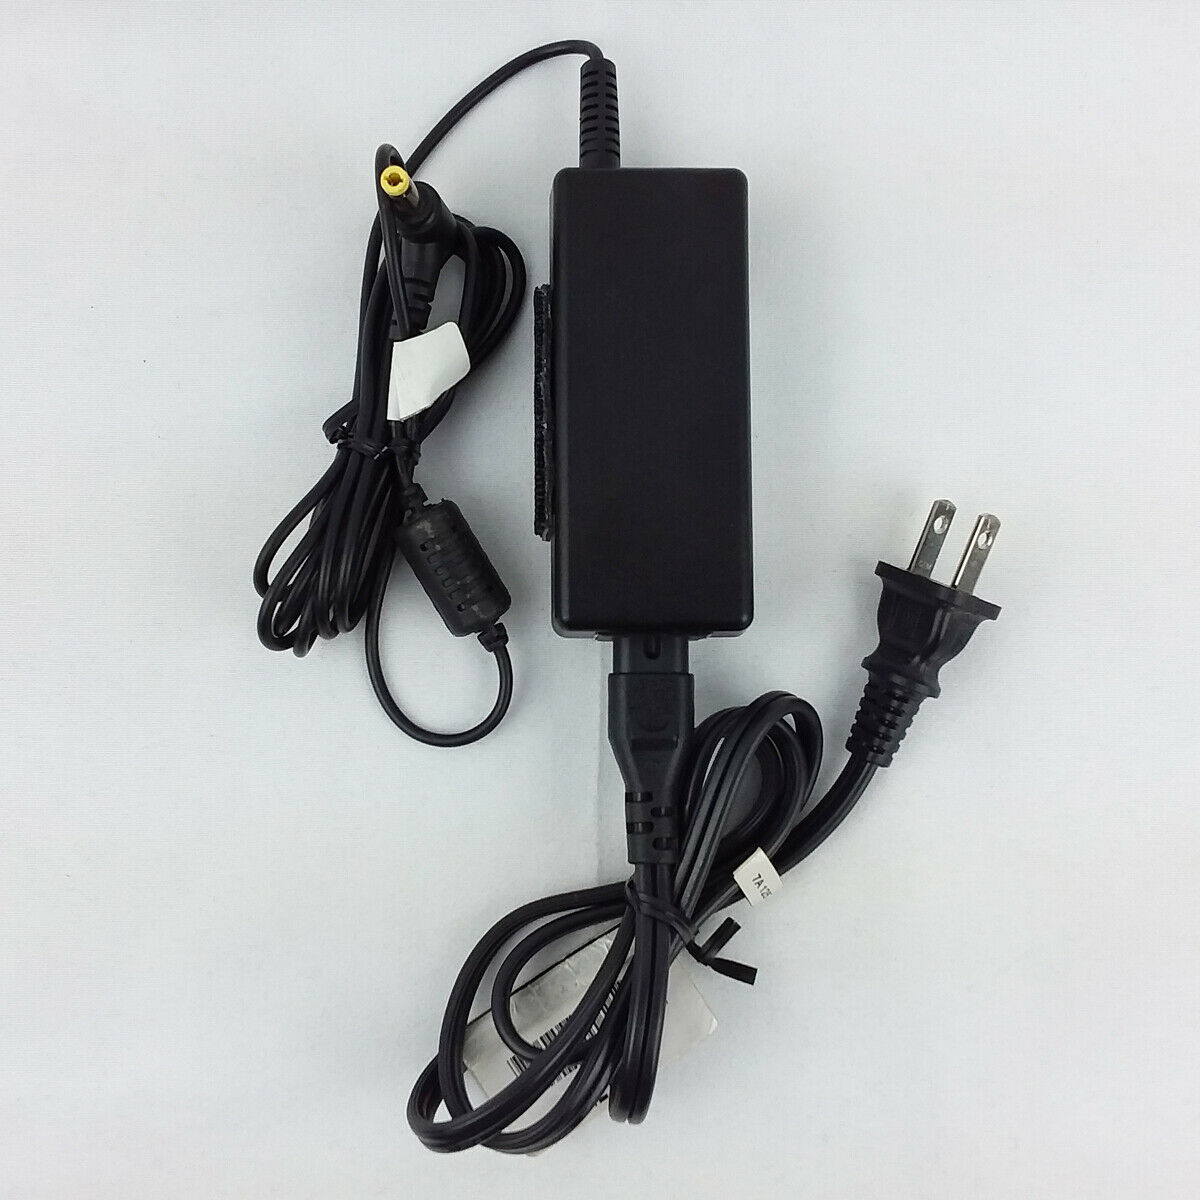 Original Safety LN-A0403A3C Power Adapter Cable Cord Box Adaptor Brand: Safety - Click Image to Close